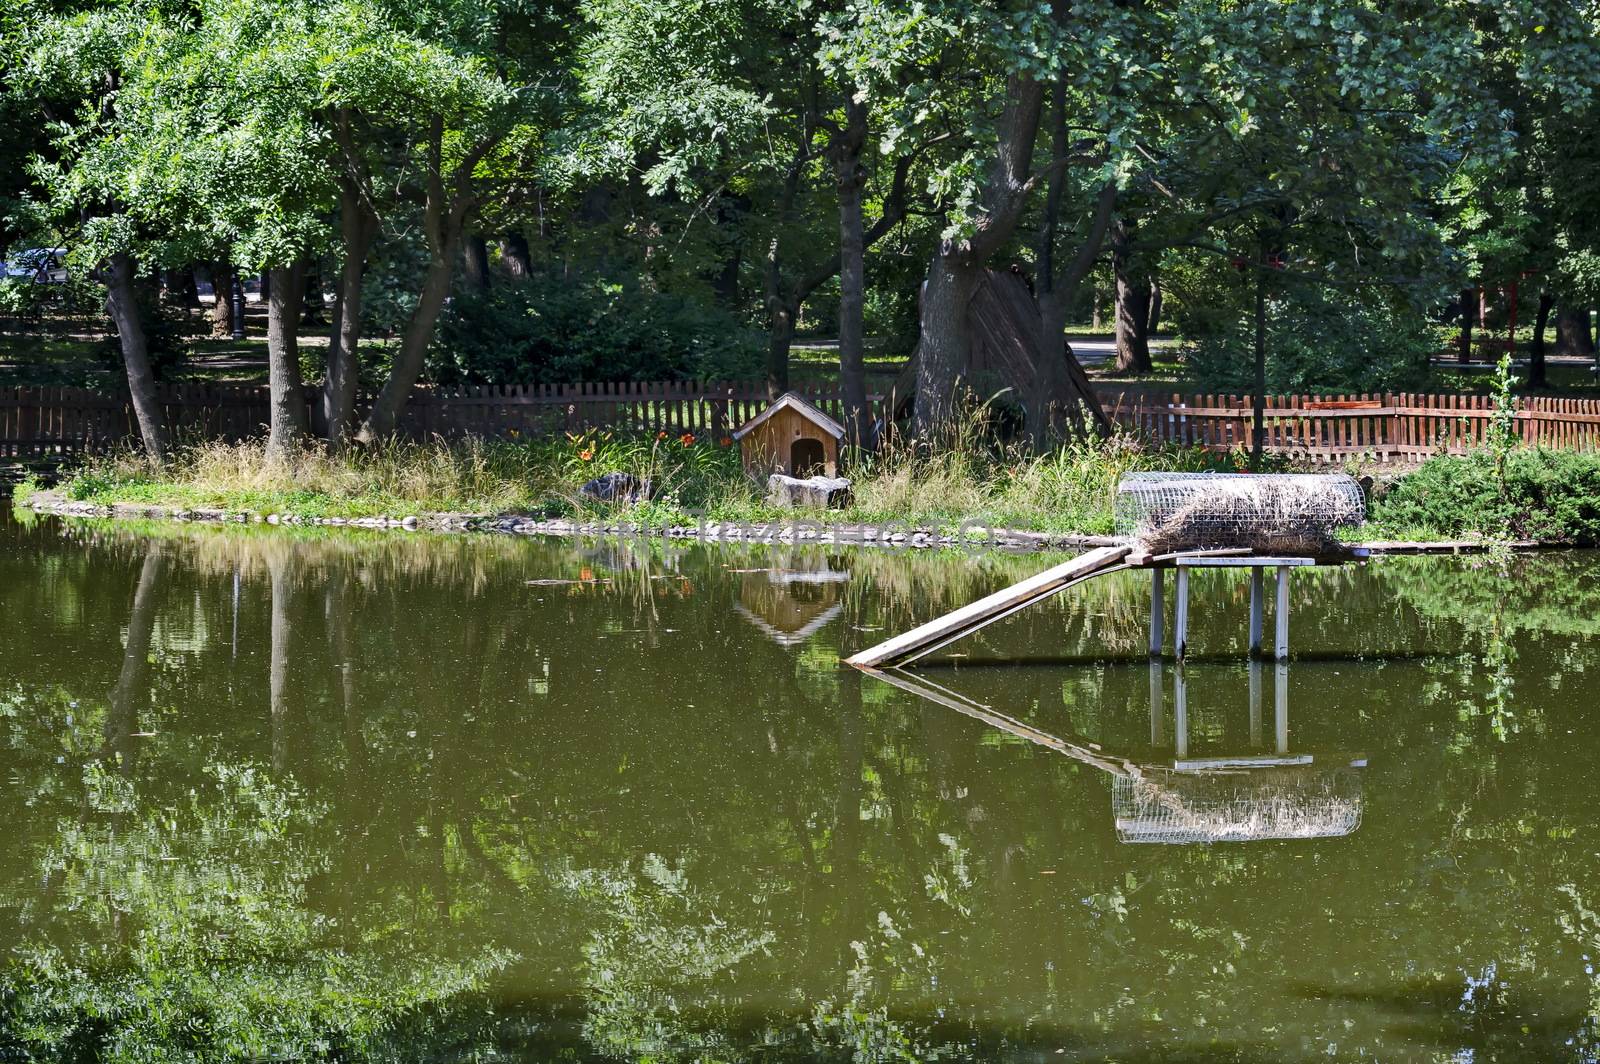 A small house built into the lake and nesting place for ducks in the city garden, Sofia, Bulgaria